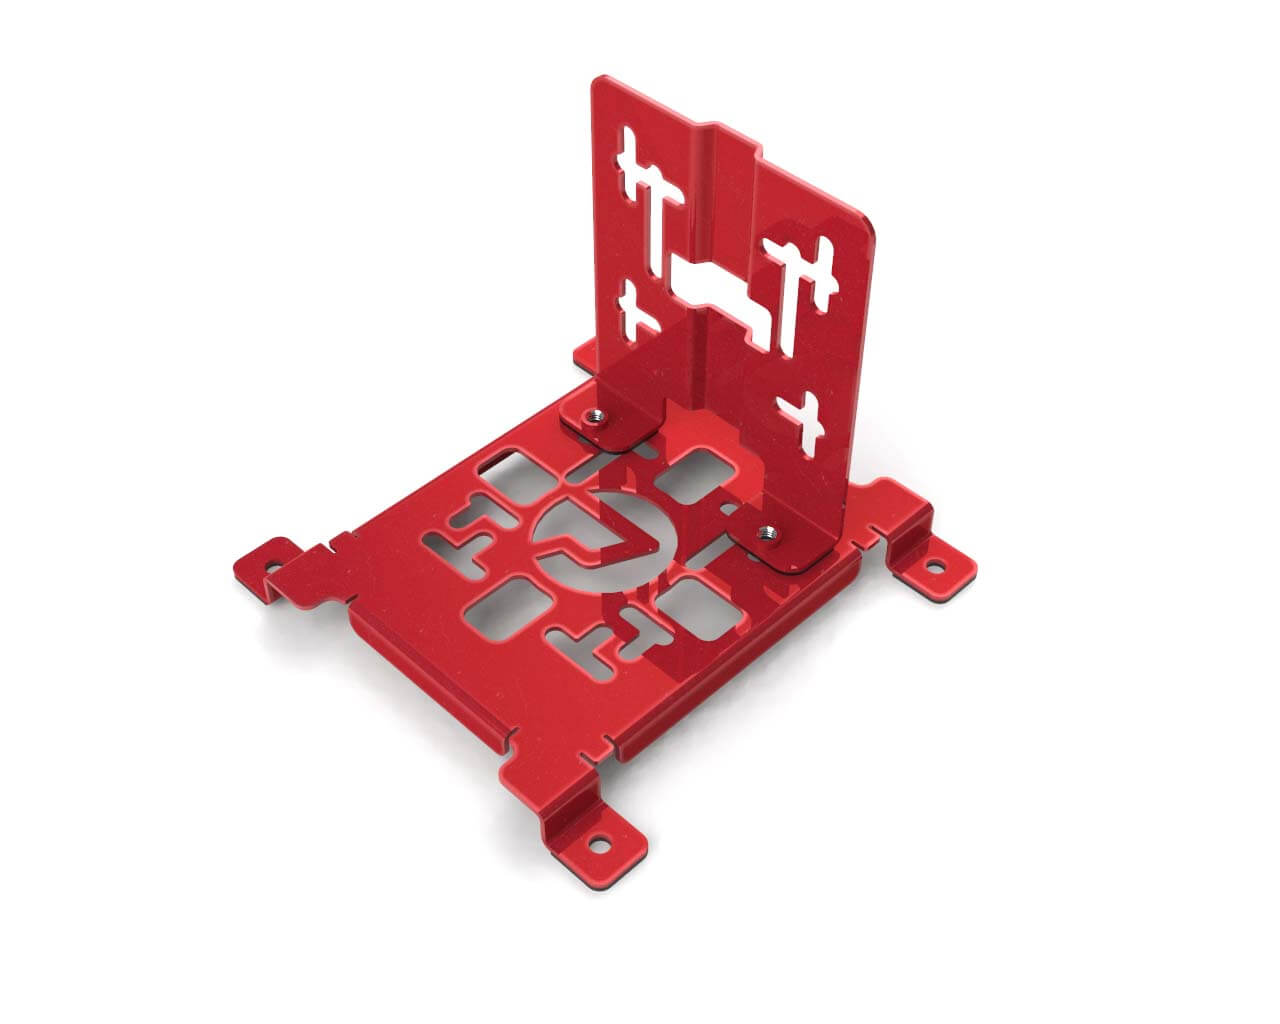 PrimoChill SX Universal Spider Mount Bracket Kit - 120mm Series - PrimoChill - KEEPING IT COOL Candy Red